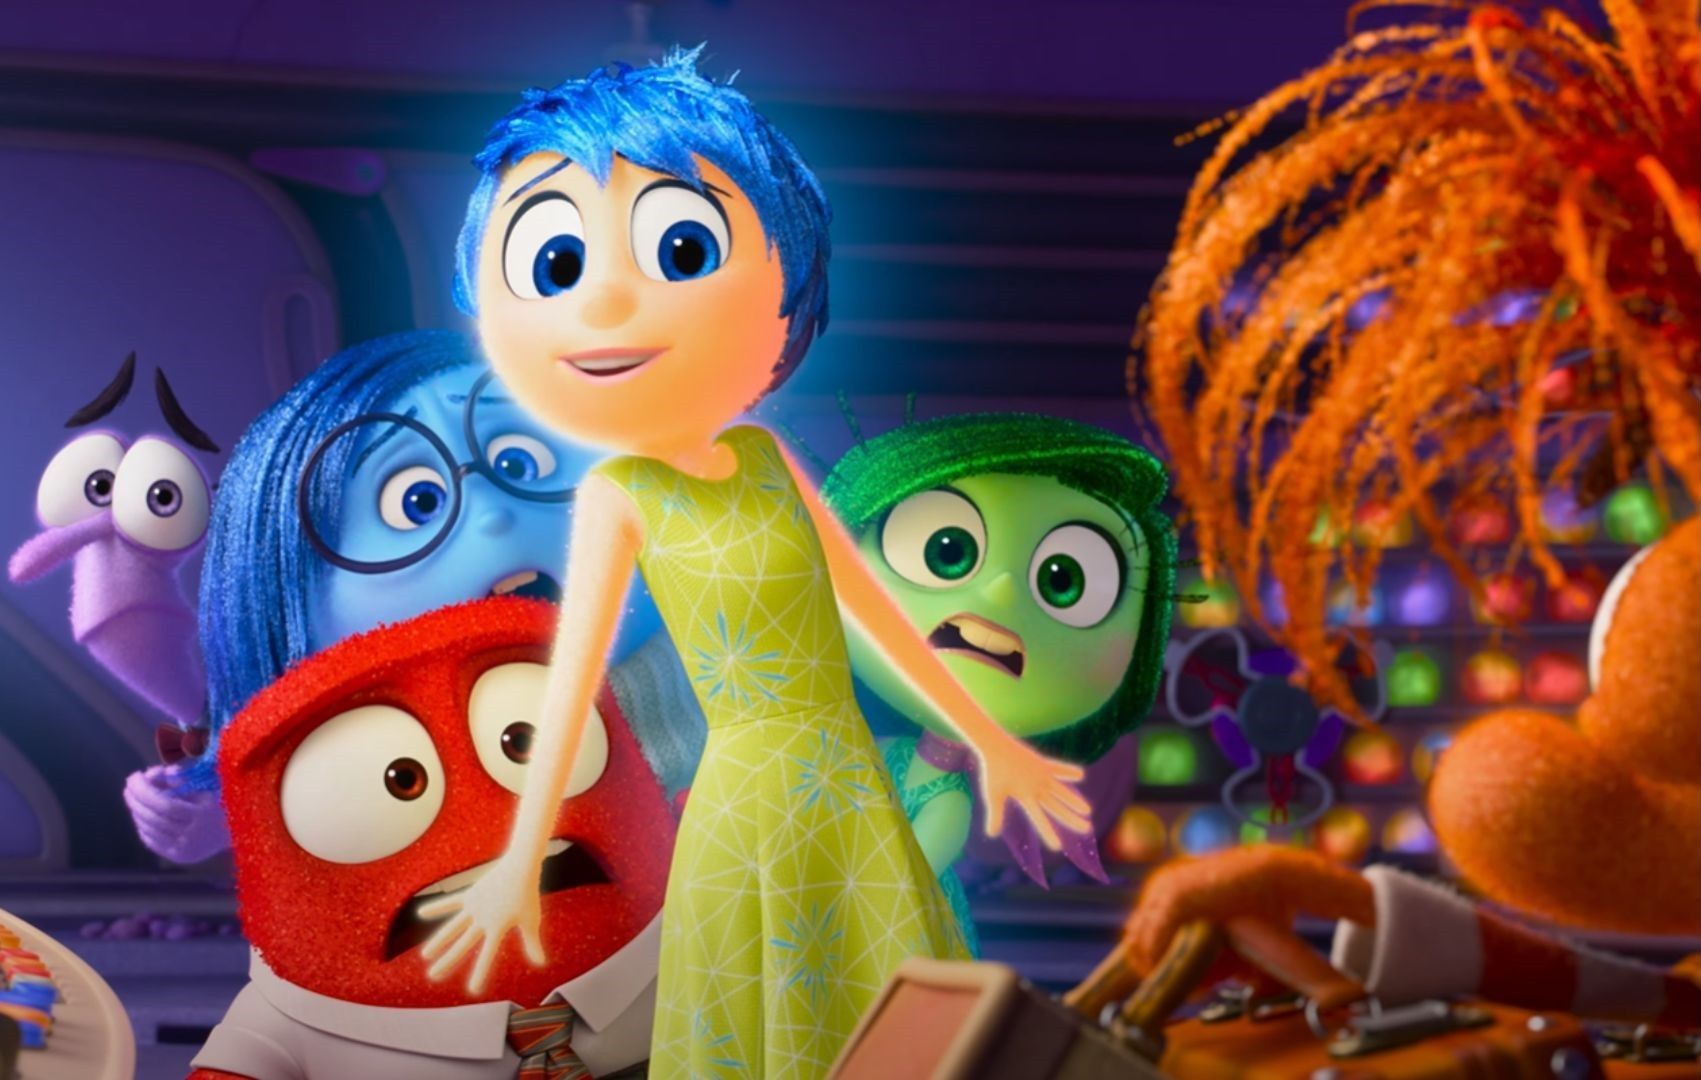 WATCH: 'Inside Out 2' teaser trailer introduces Anxiety